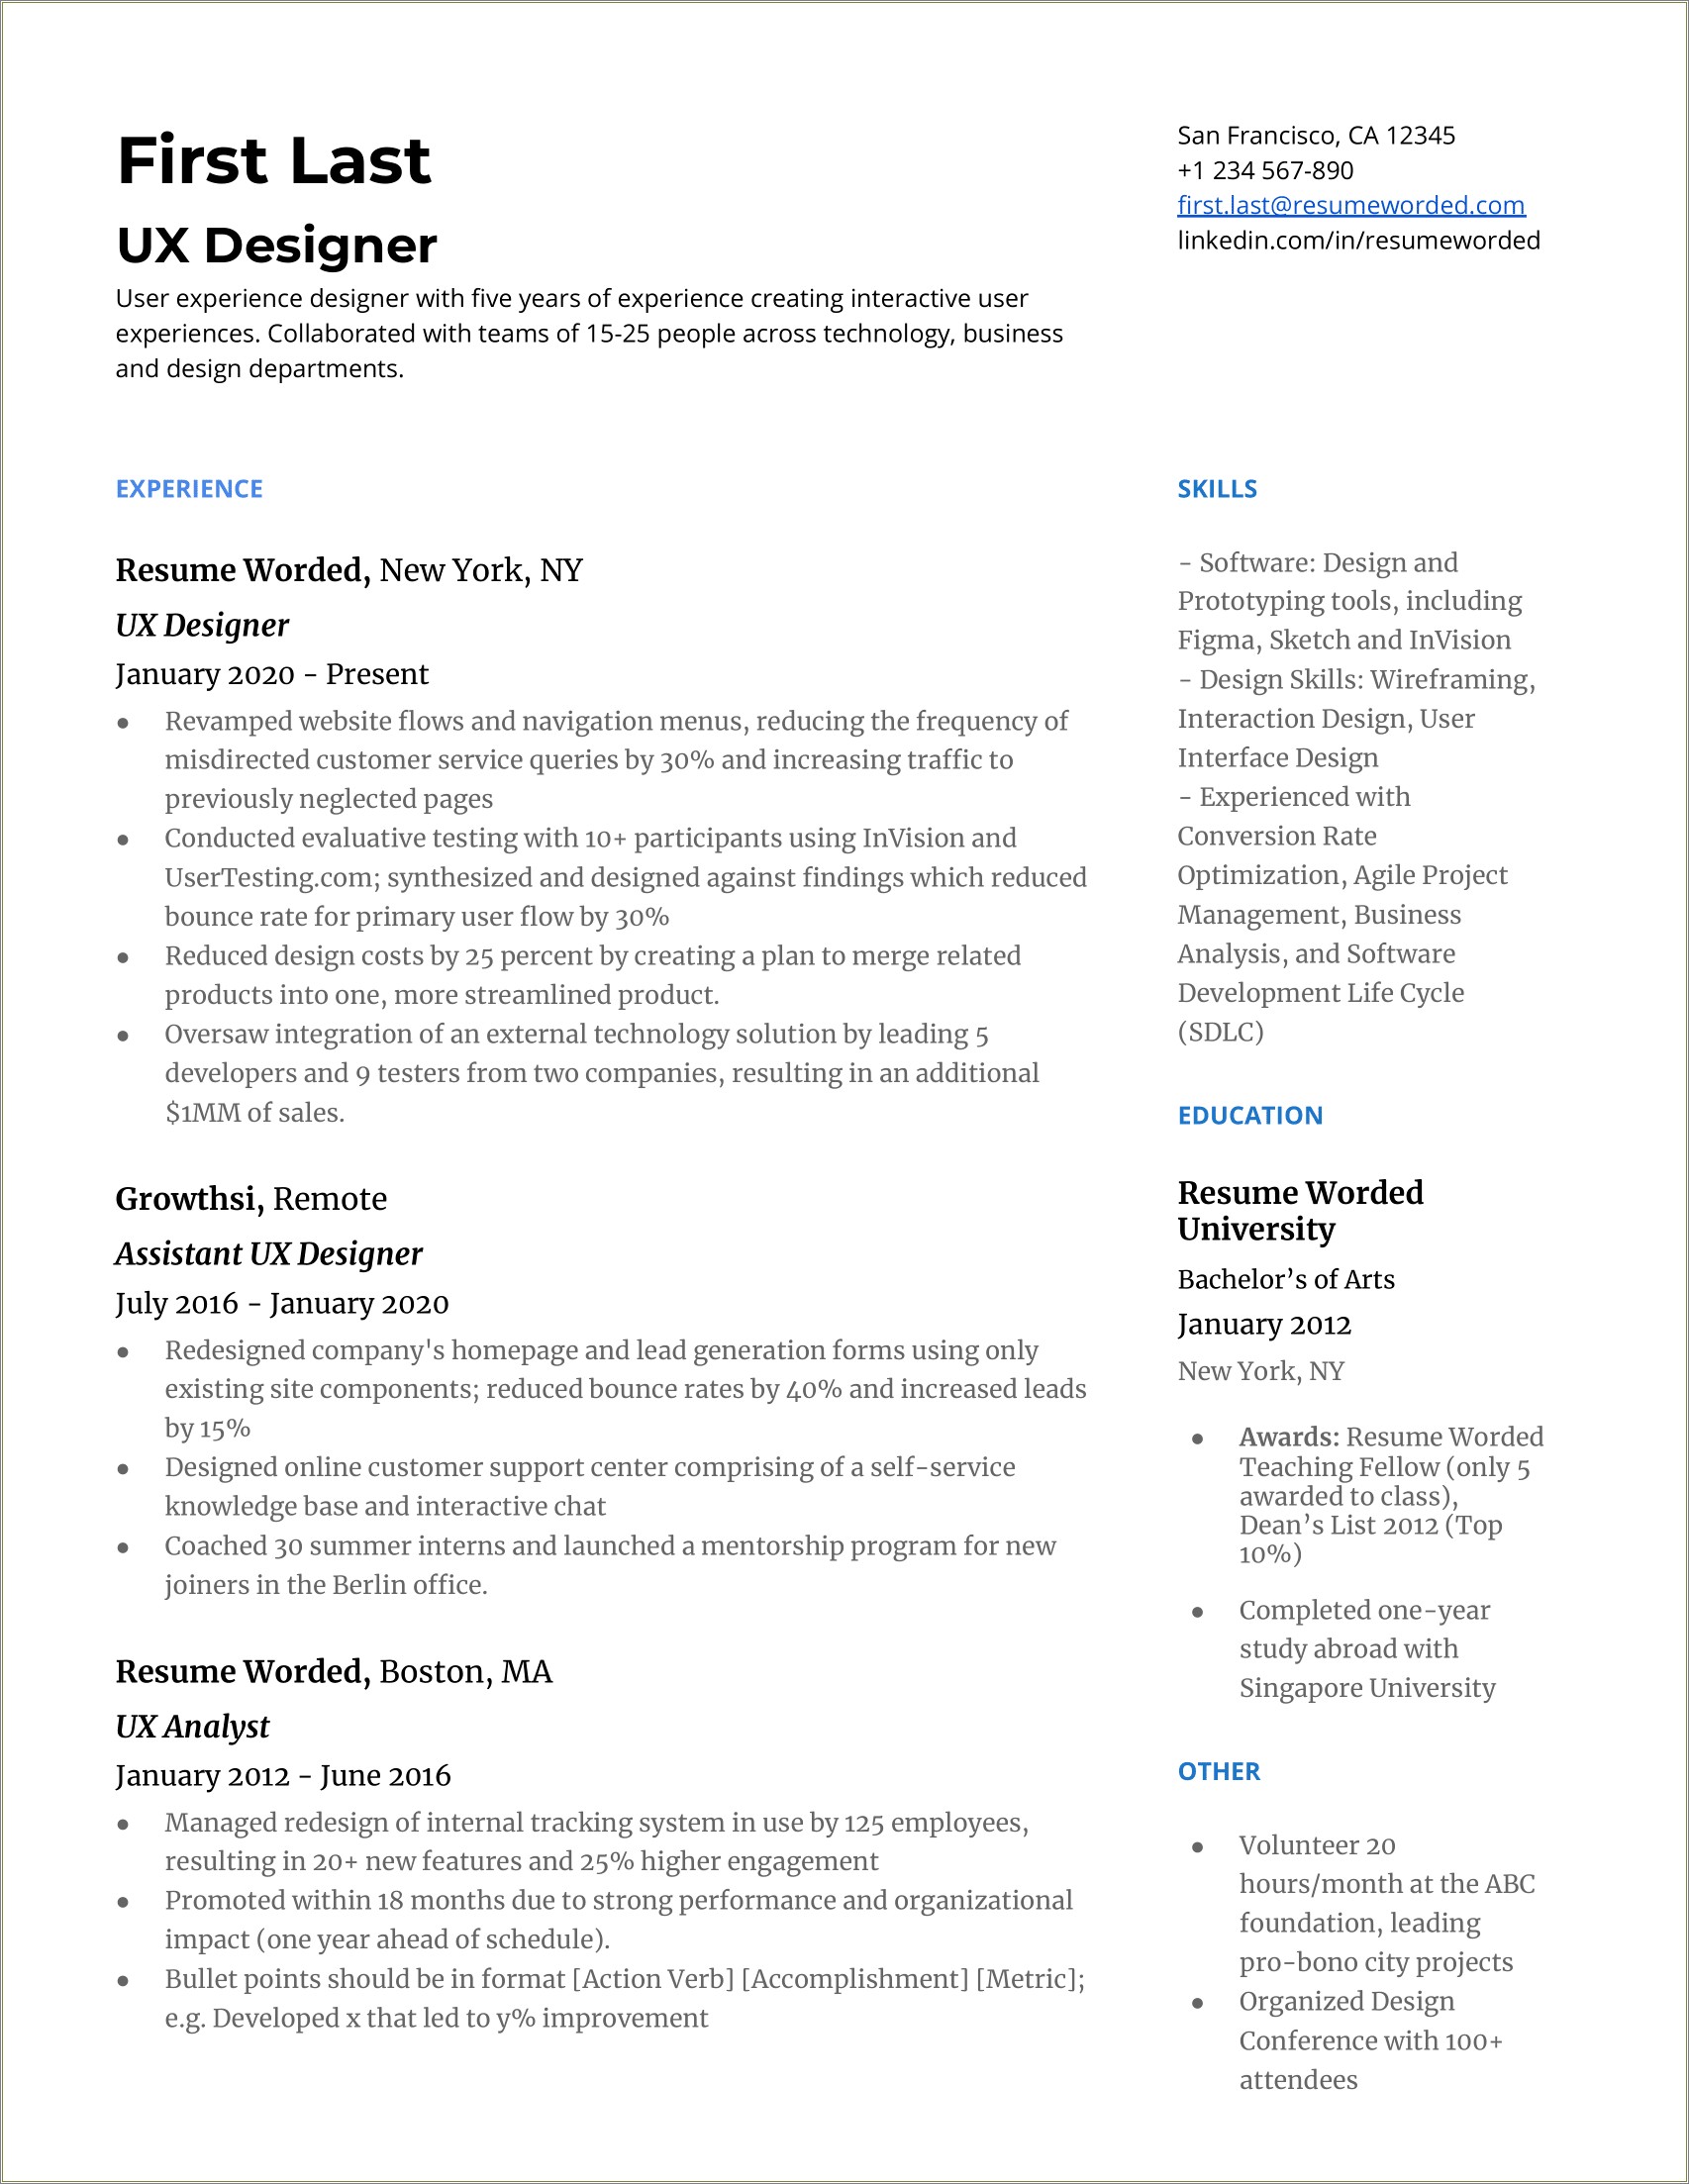 Resume Template With Recent And Relevant Sections